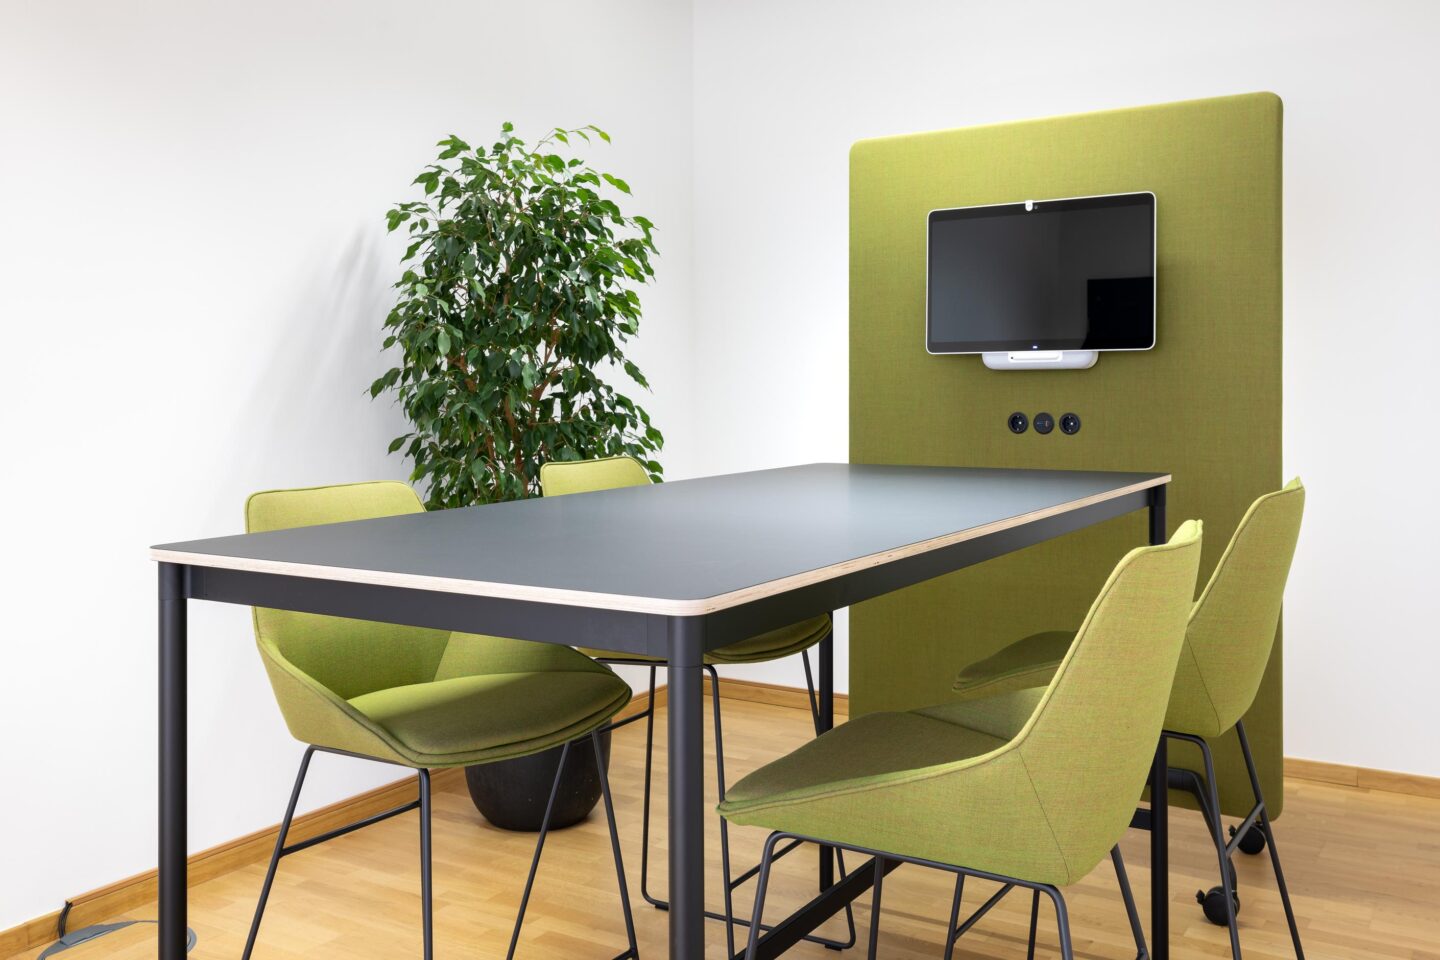 inovex GmbH │ your partner for digitalisation │ modern working environments with feco